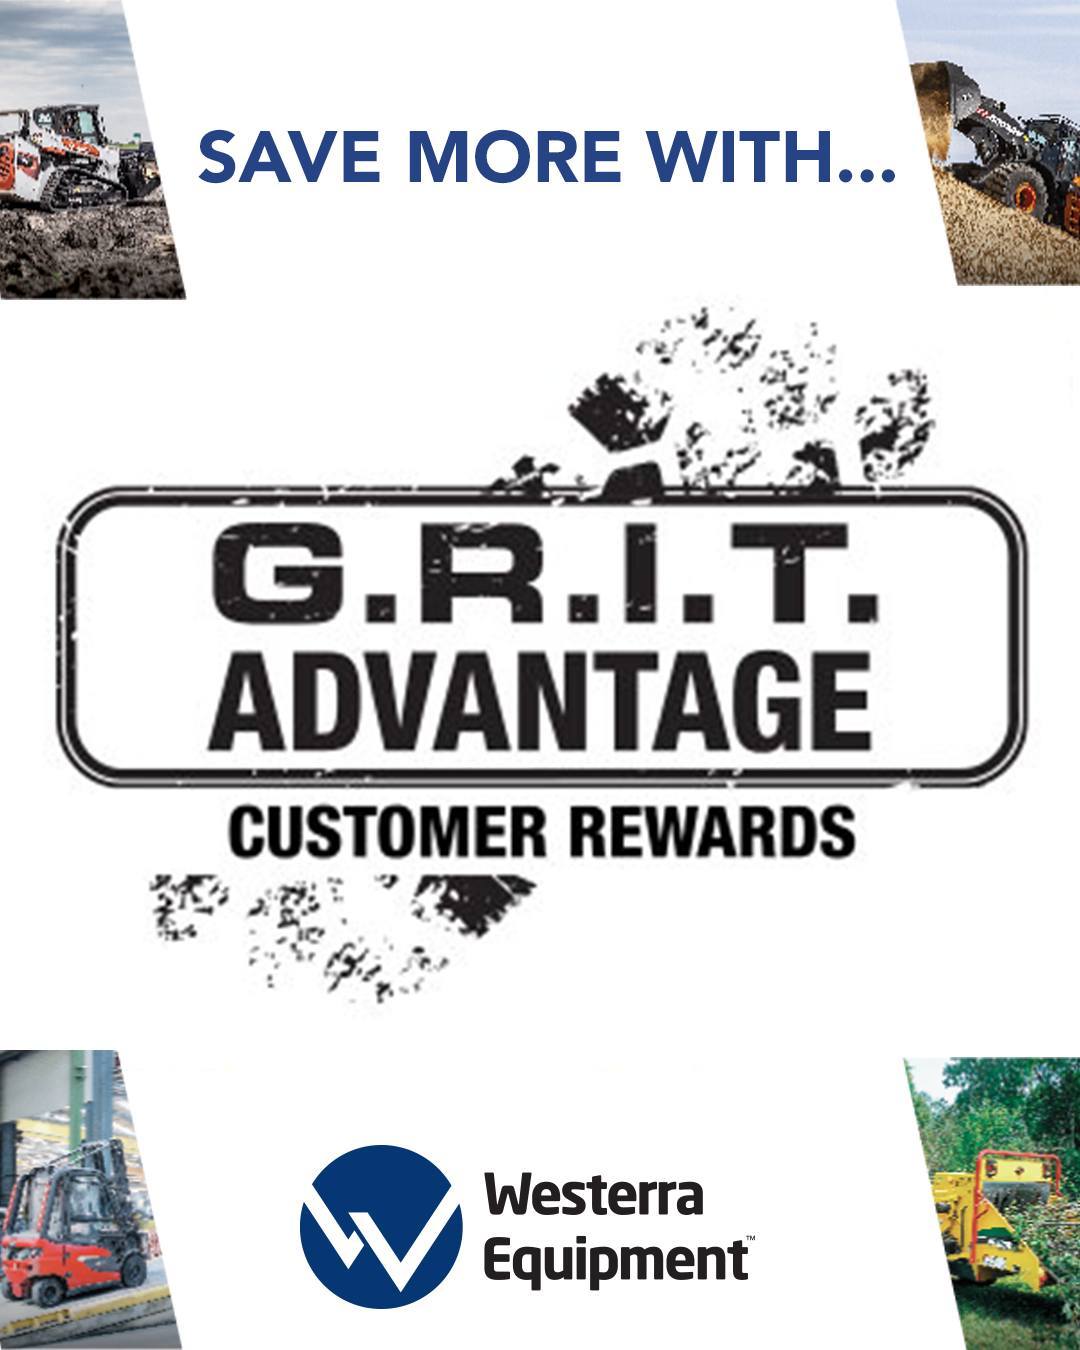 Turning equipment purchases into rewards, one point at a time. 💪✨ Sign up and start earning your well-deserved #GritRewardsPoints!
#Discounts #RewardPoints #MembersOnly #CustomerRewards #LoyaltyPoints #mex #Miniexcvator #constructionequipment #heavyconstruction #equipmentmaintenance #maintenance #service